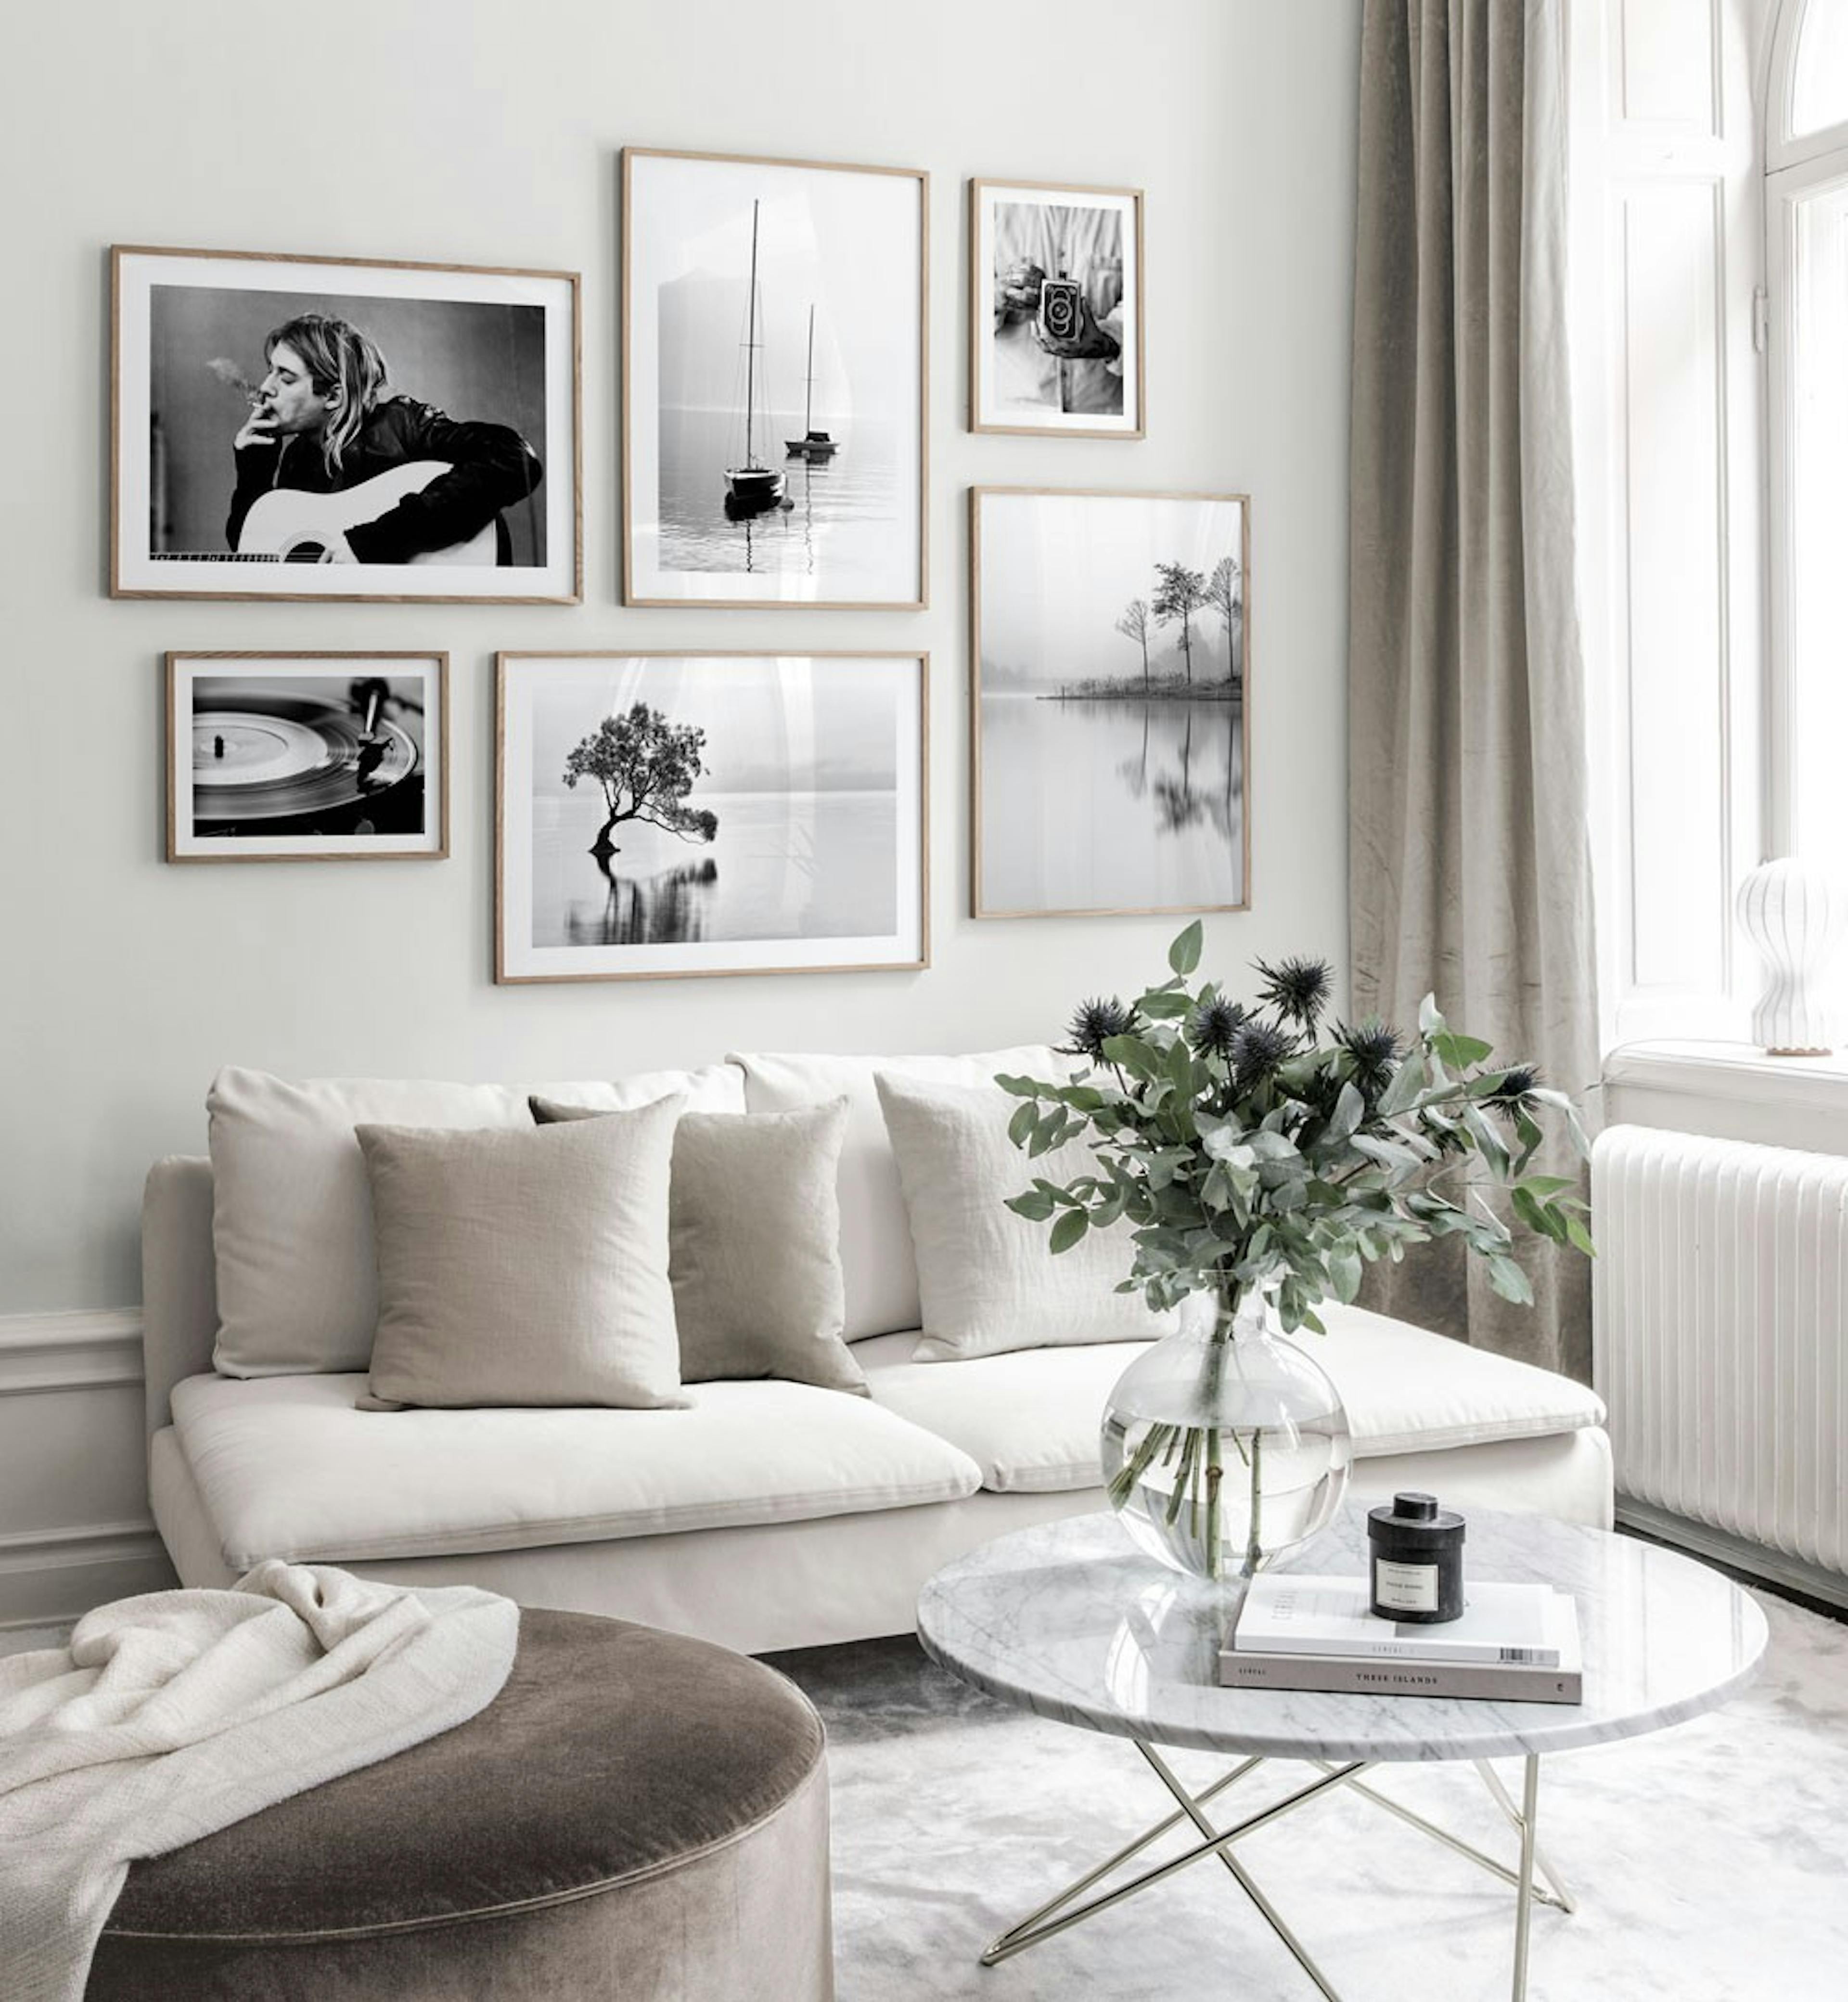 Gallery wall in Scandinavian design with black and white posters